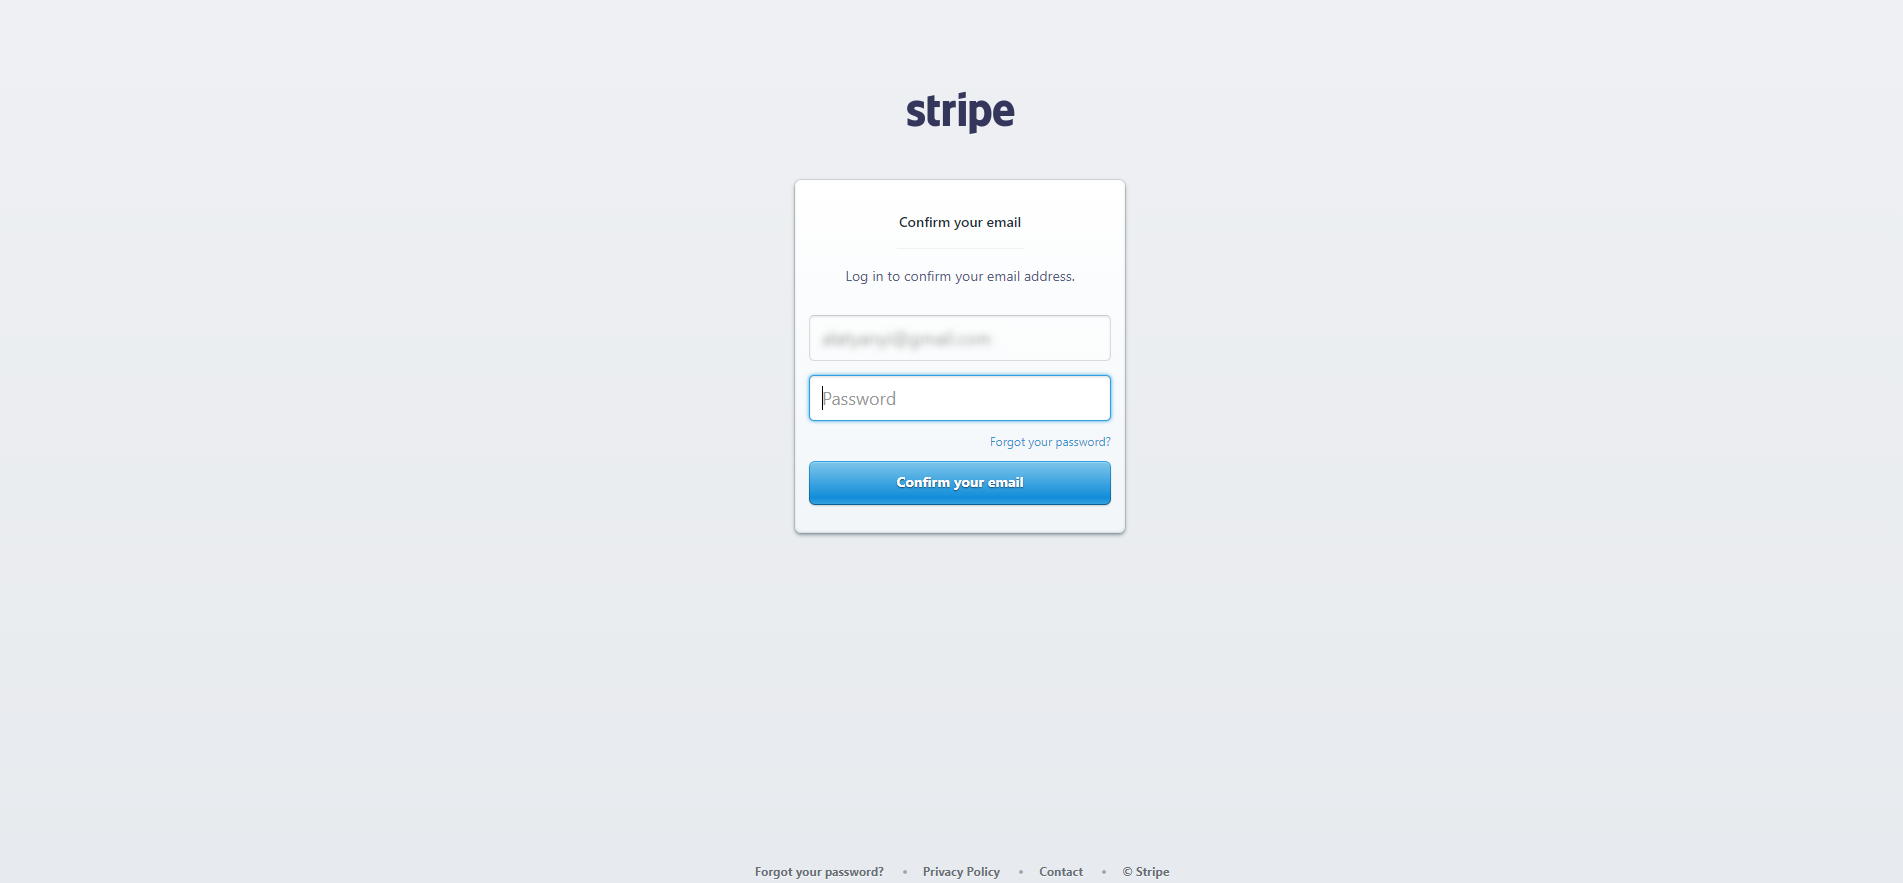 stripe_account_creation_8.png